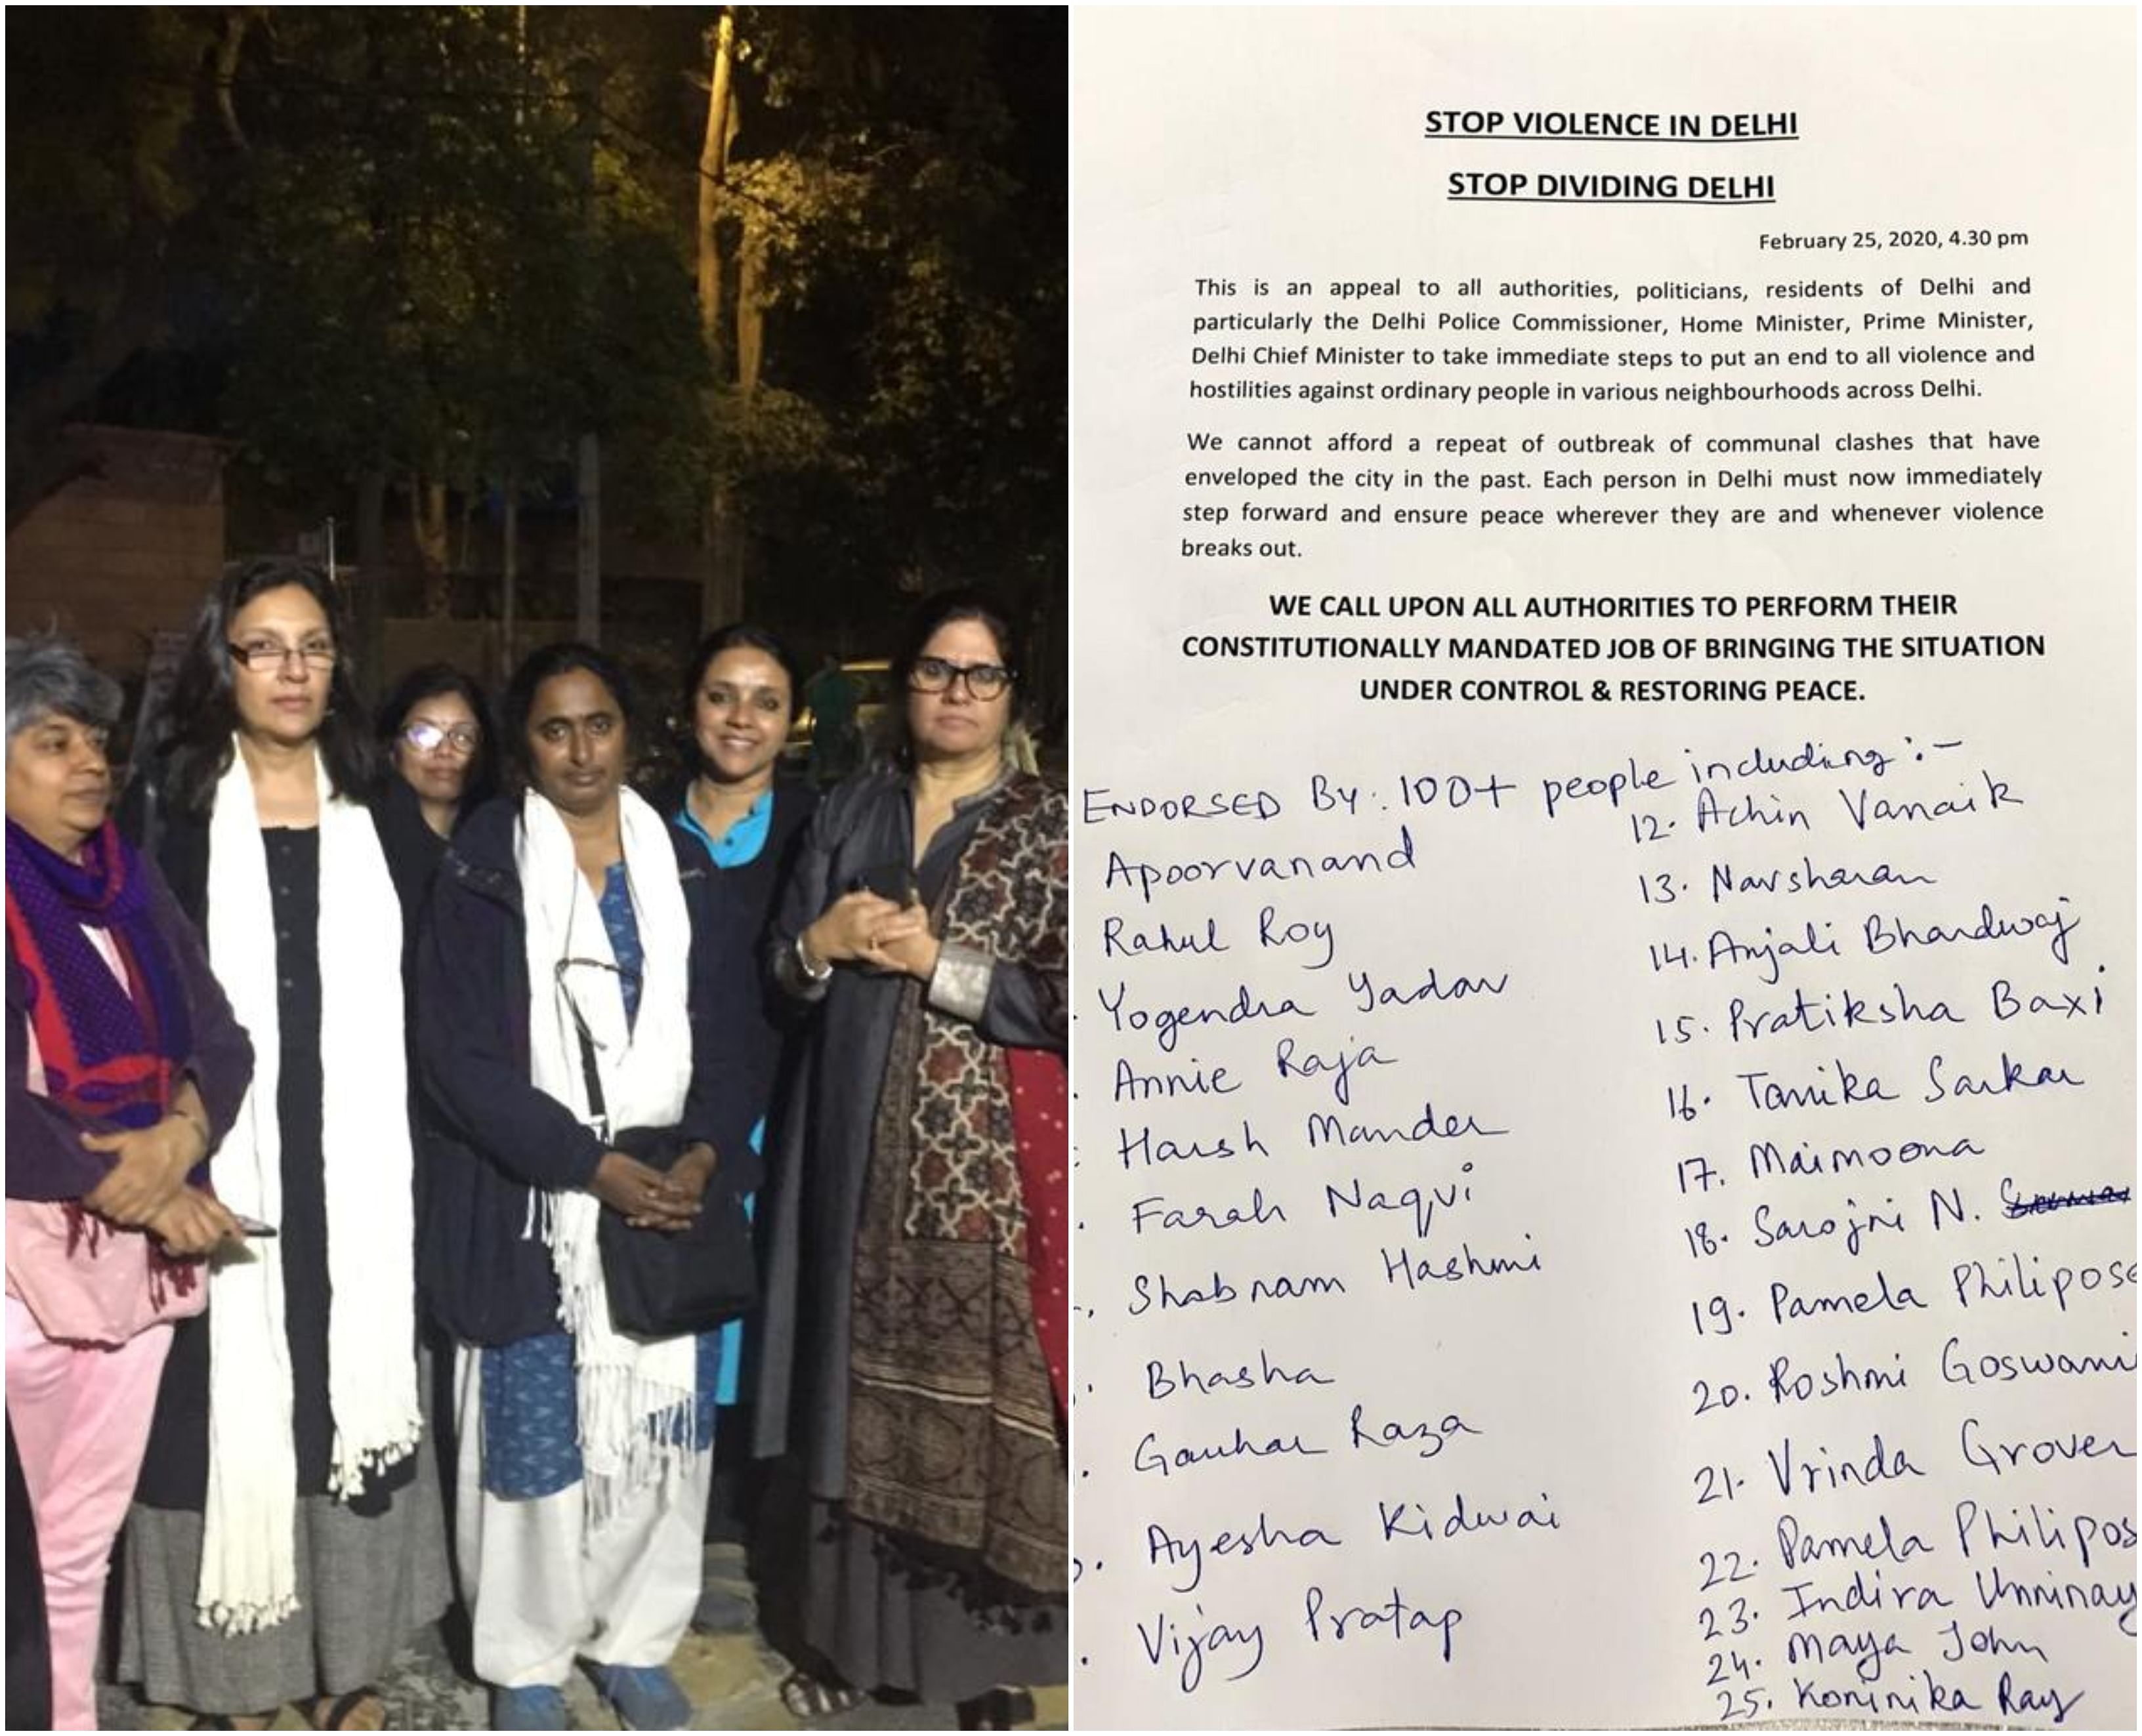 Over 100 activists, including Harsh Mander, Apoorvananad, Annie Raja, Yogendra Yadav, Shabnam Hashmi, and senior advocate Vrinda Grover came out with a statement in which they called upon "all authorities to perform their constitutionally mandated job of bringing the situation under control and restoring peace". Credit: Twitter (@kavita_krishnan)